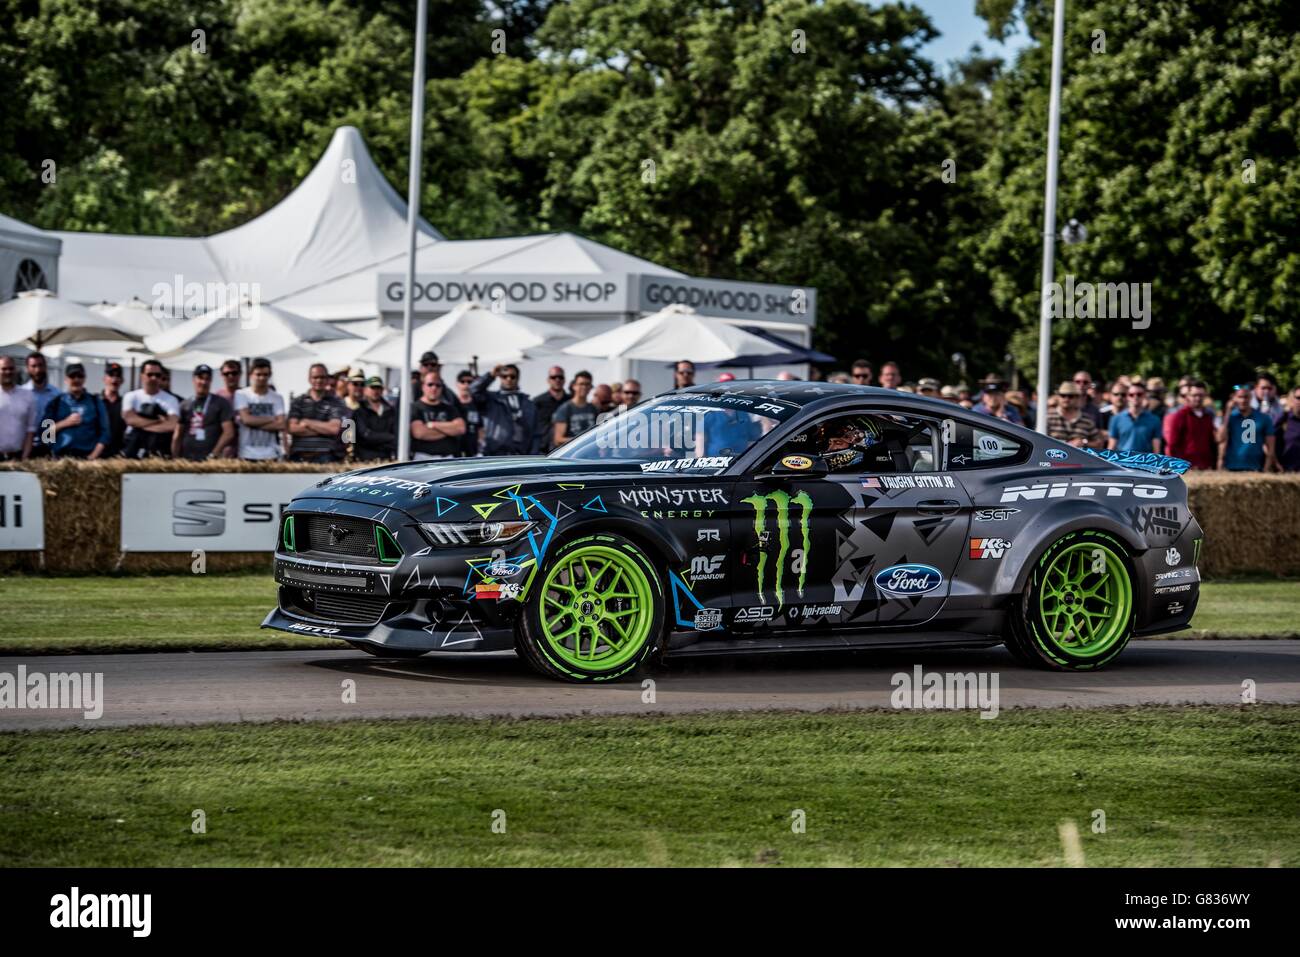 monster energy mustang at goodwood festival of speed Stock Photo - Alamy